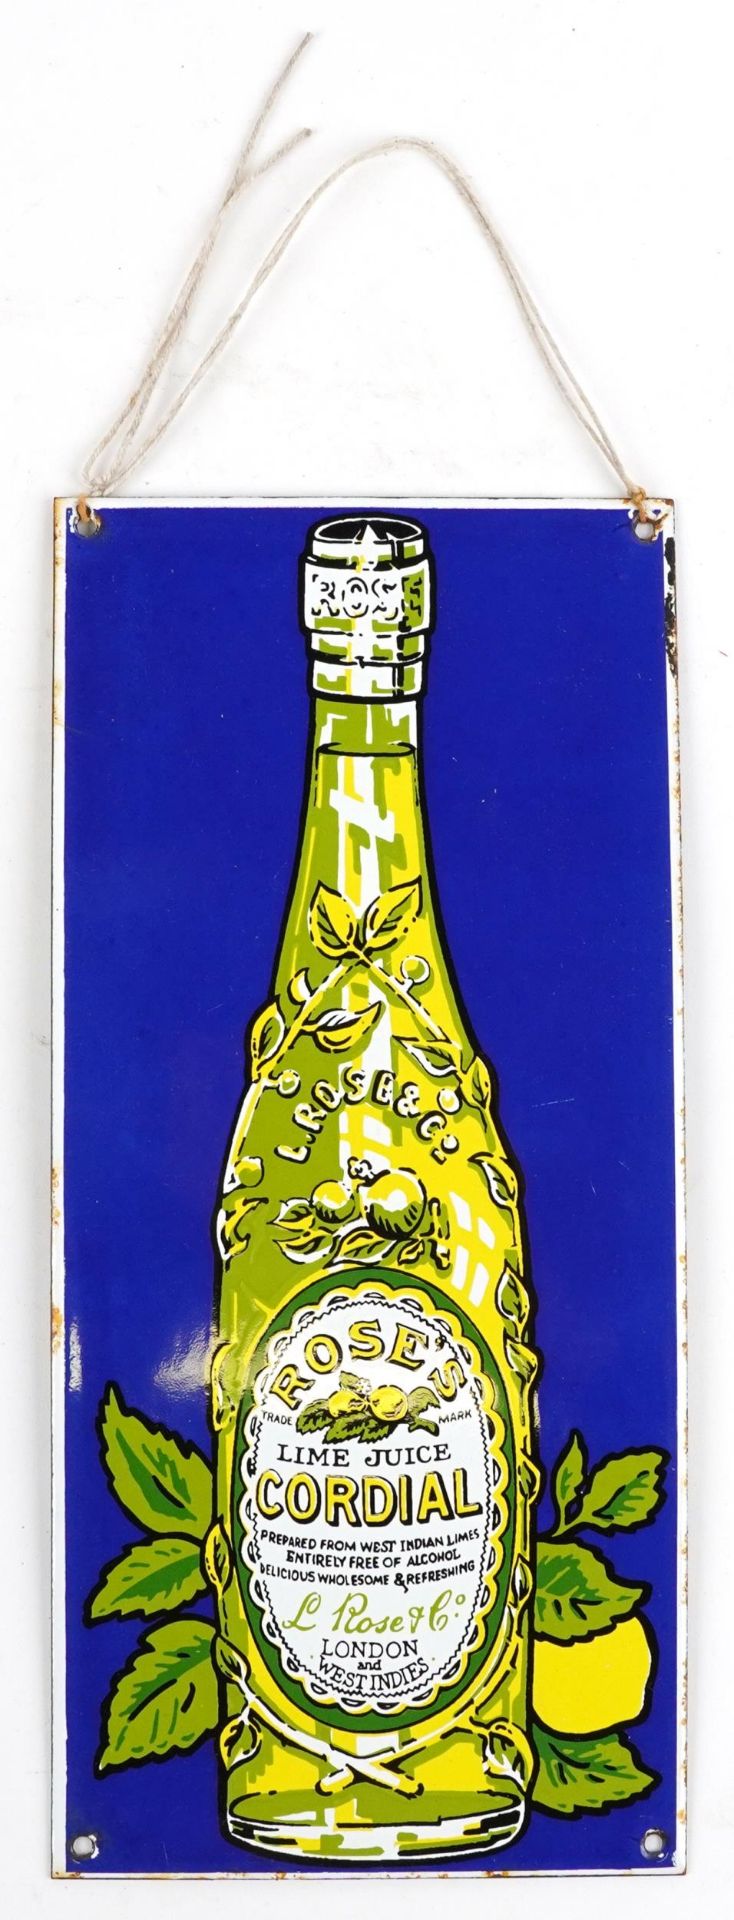 Roses Lime Juice Cordial enamel advertising sign, Garnier & Co stamp to the reverse, 36cm x 16.5cm : - Image 2 of 5